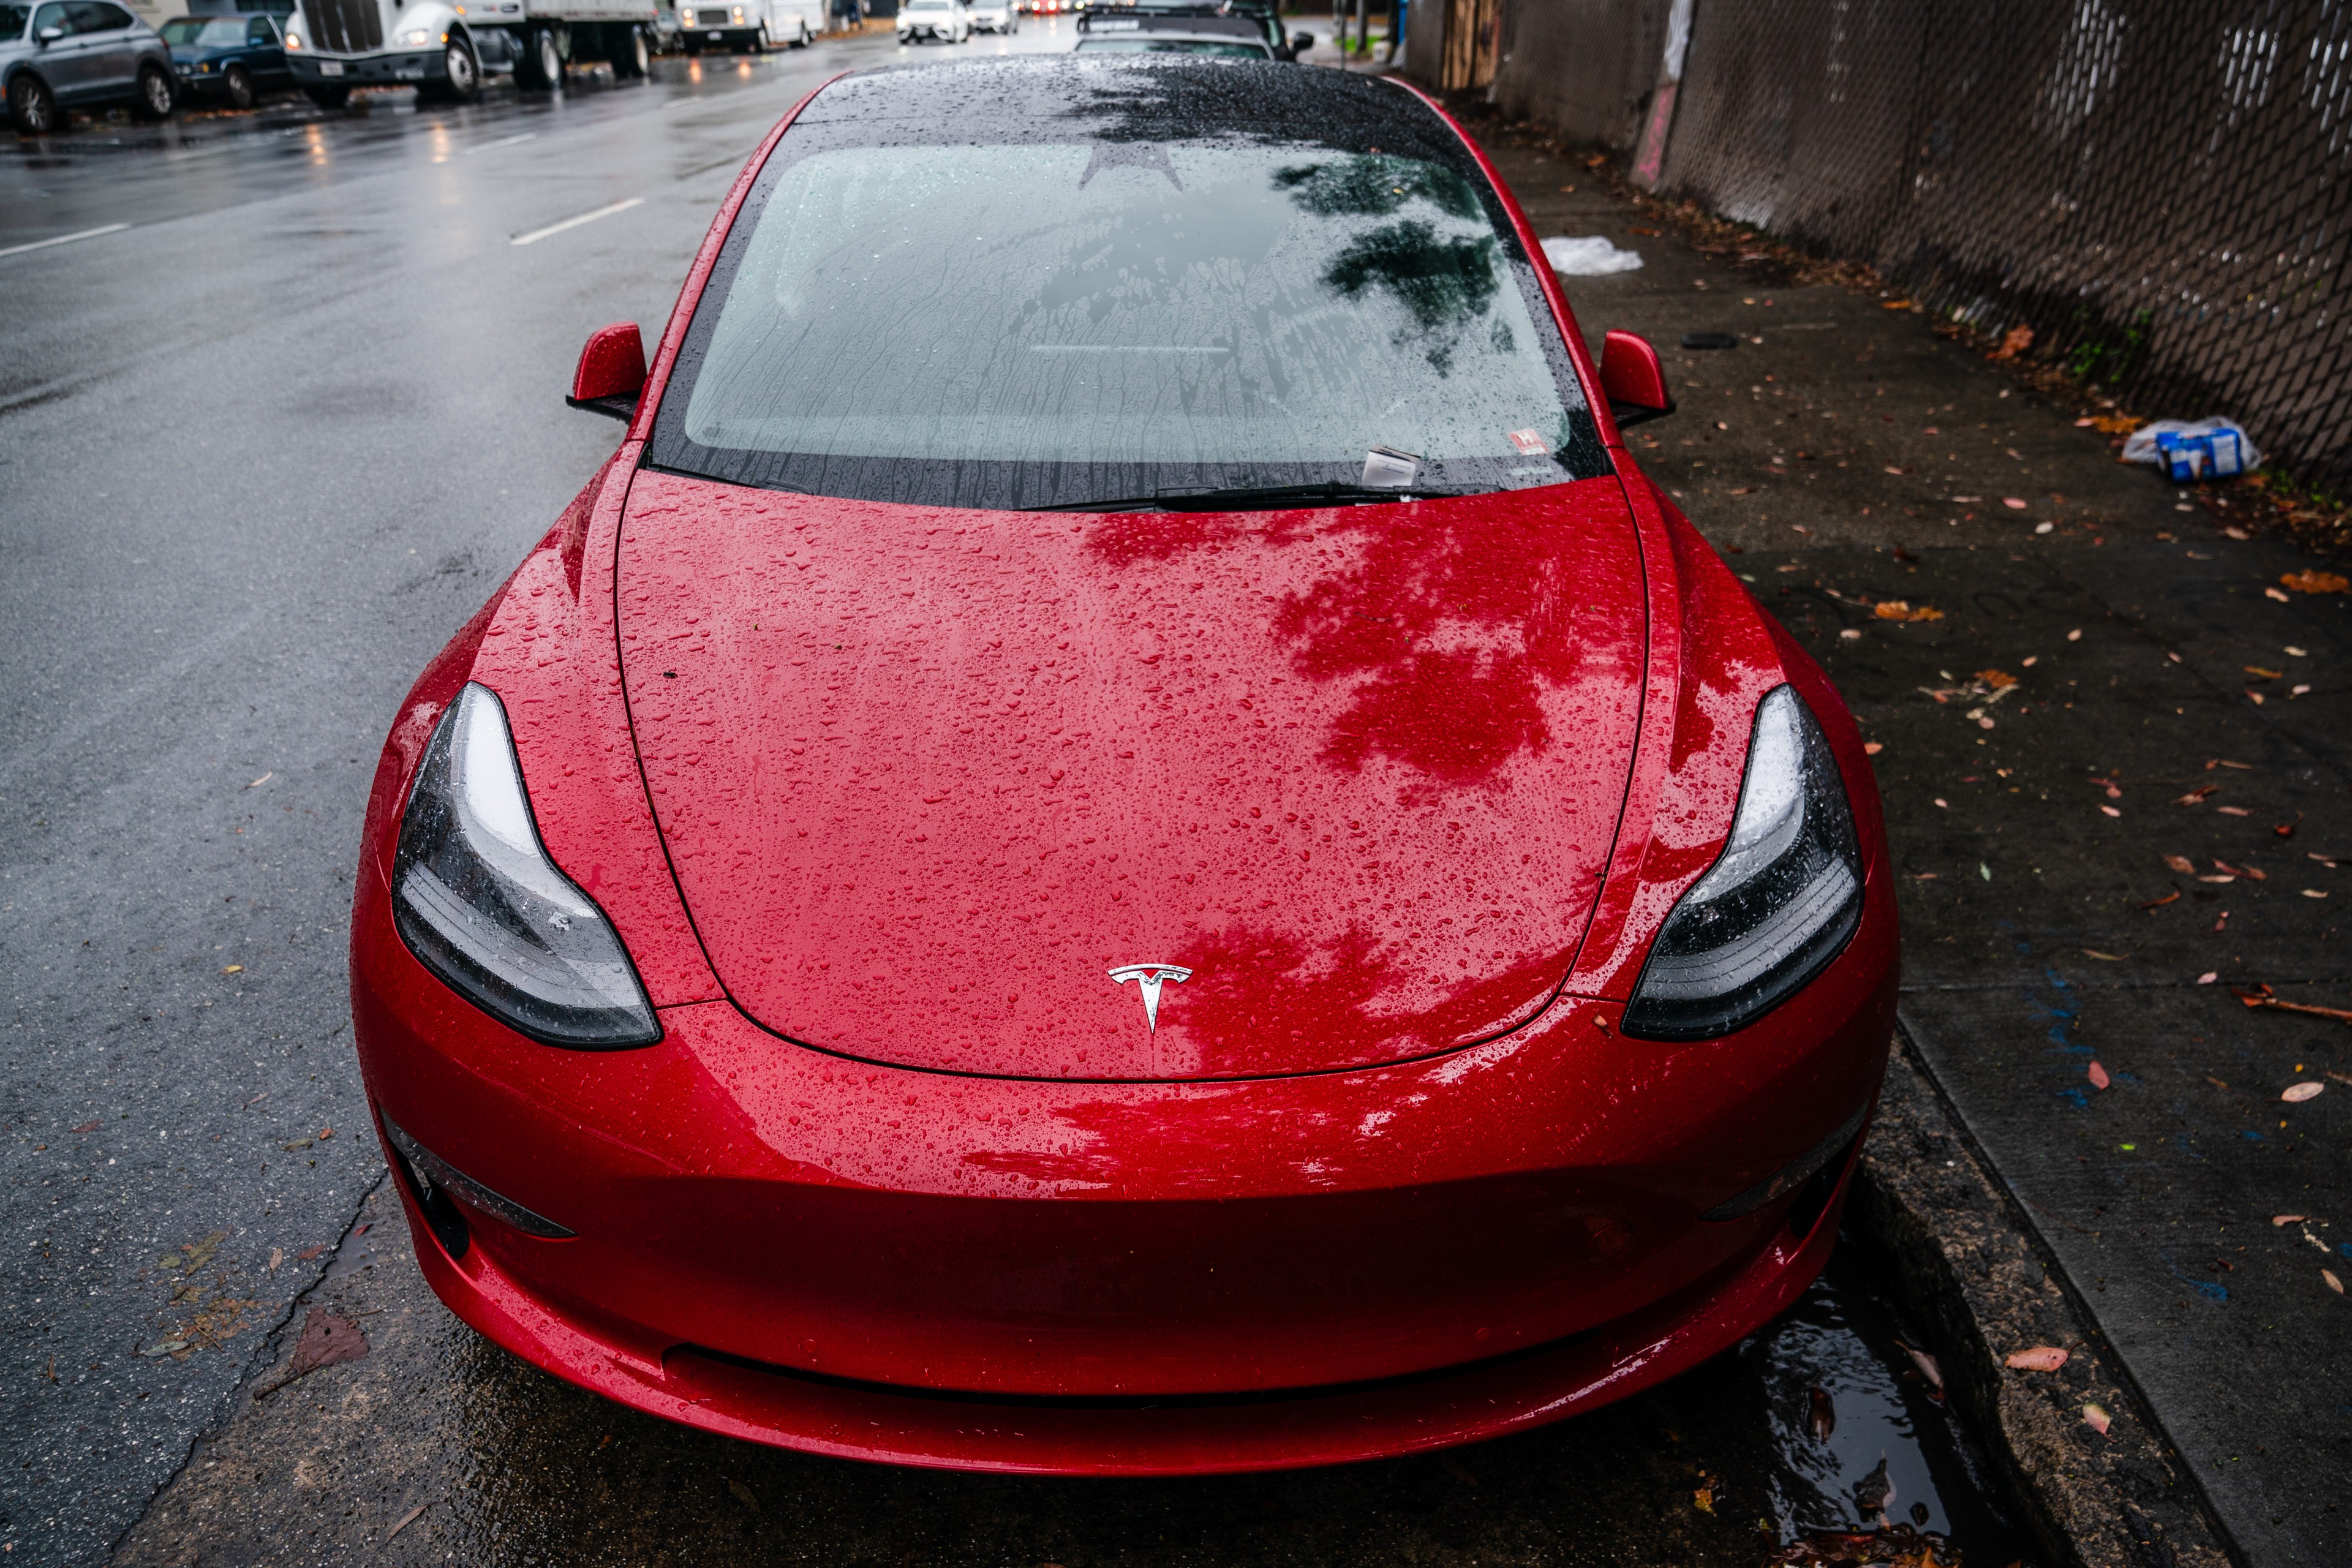 A red Tesla Model 3 with no front license plate.